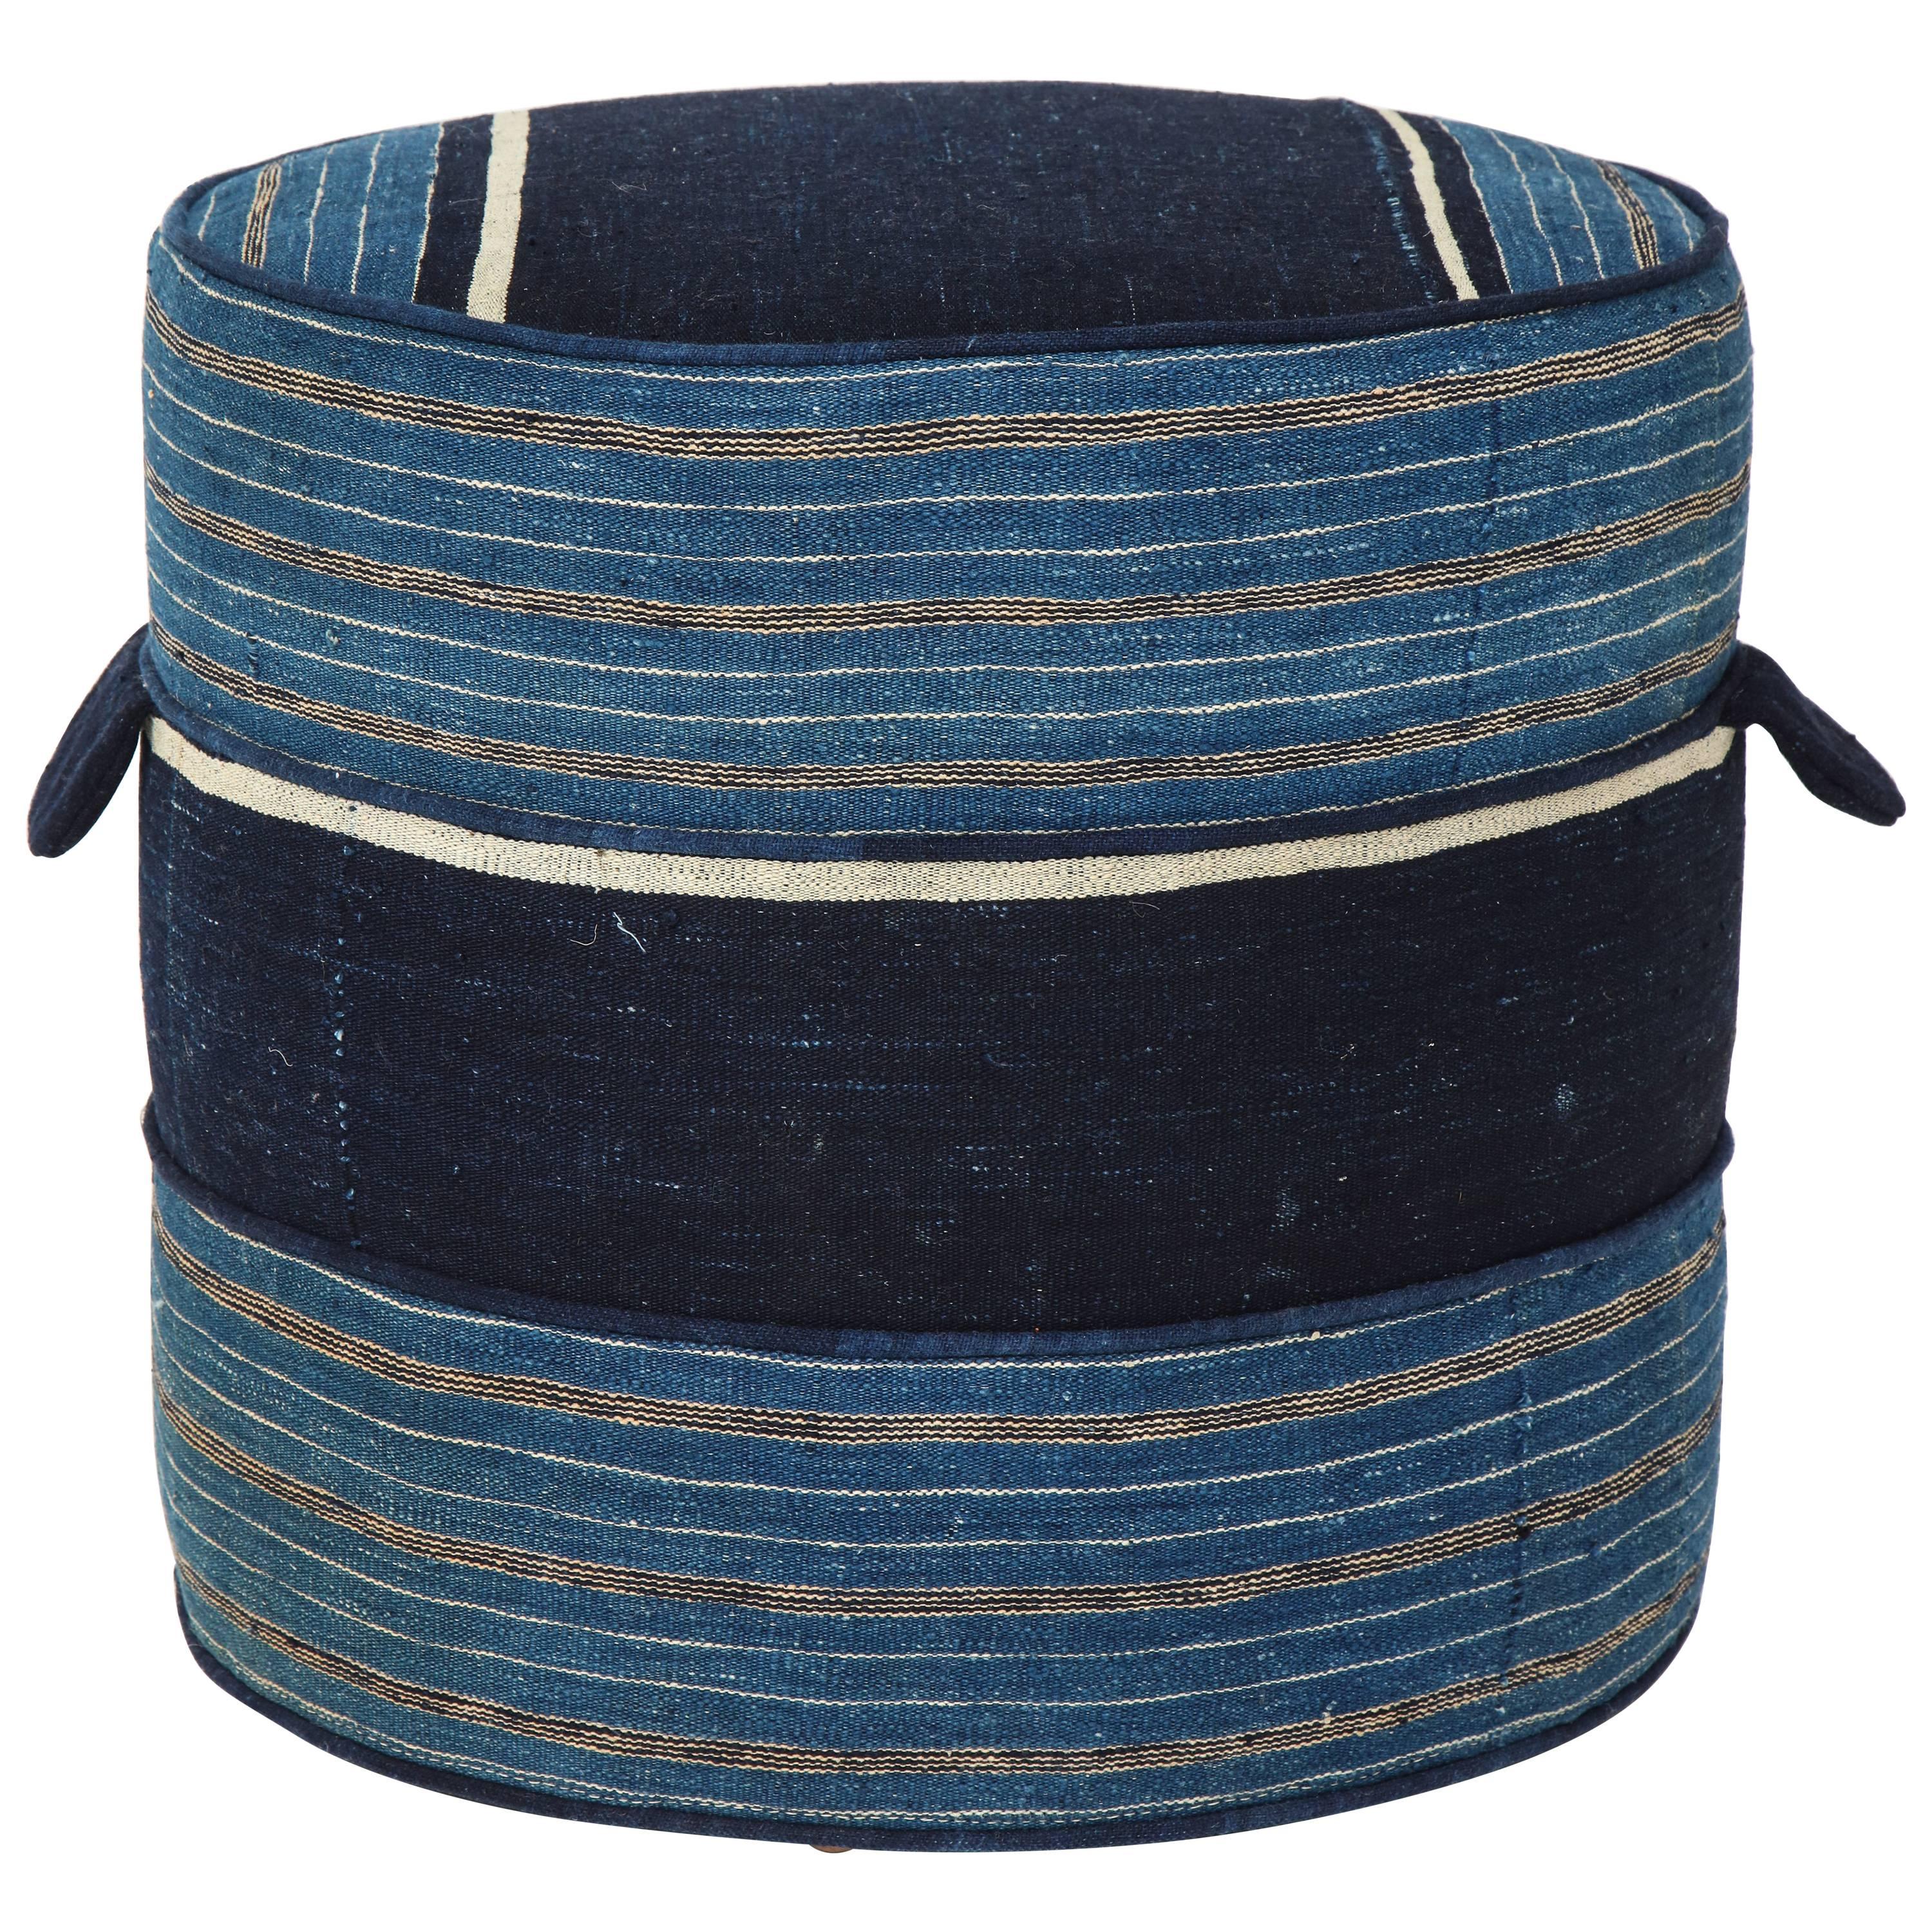 NK Collection Small Round Hassock Upholstered in Indigo African Fabric